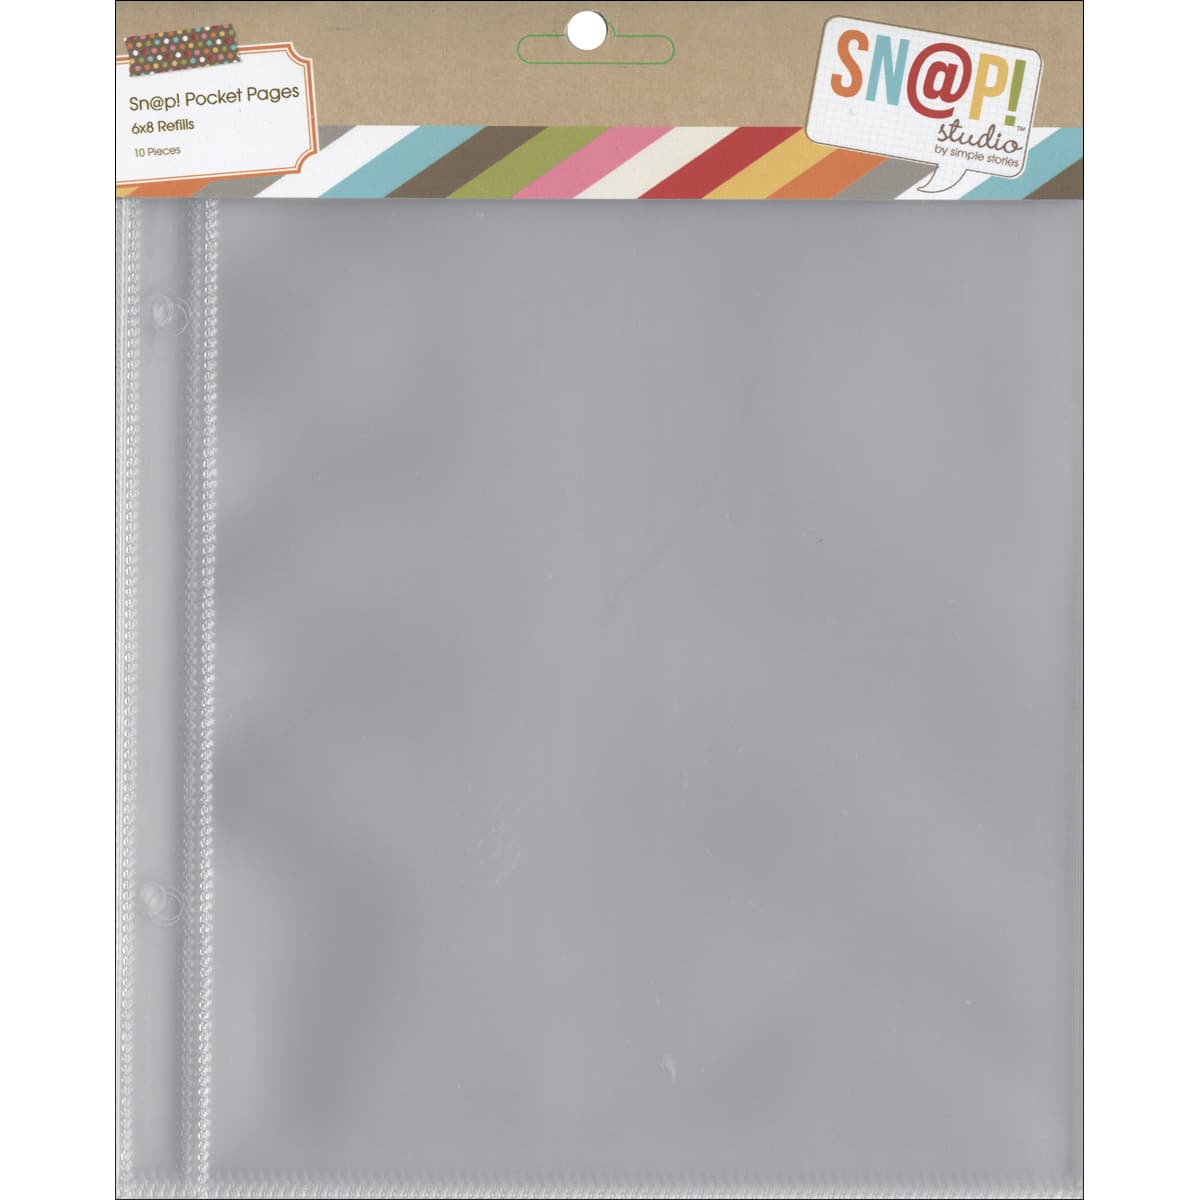 Simple Stories Sn@p!&#x2122; Pocket Pages for 6&#x22; x 8&#x22; Binders, 10ct.